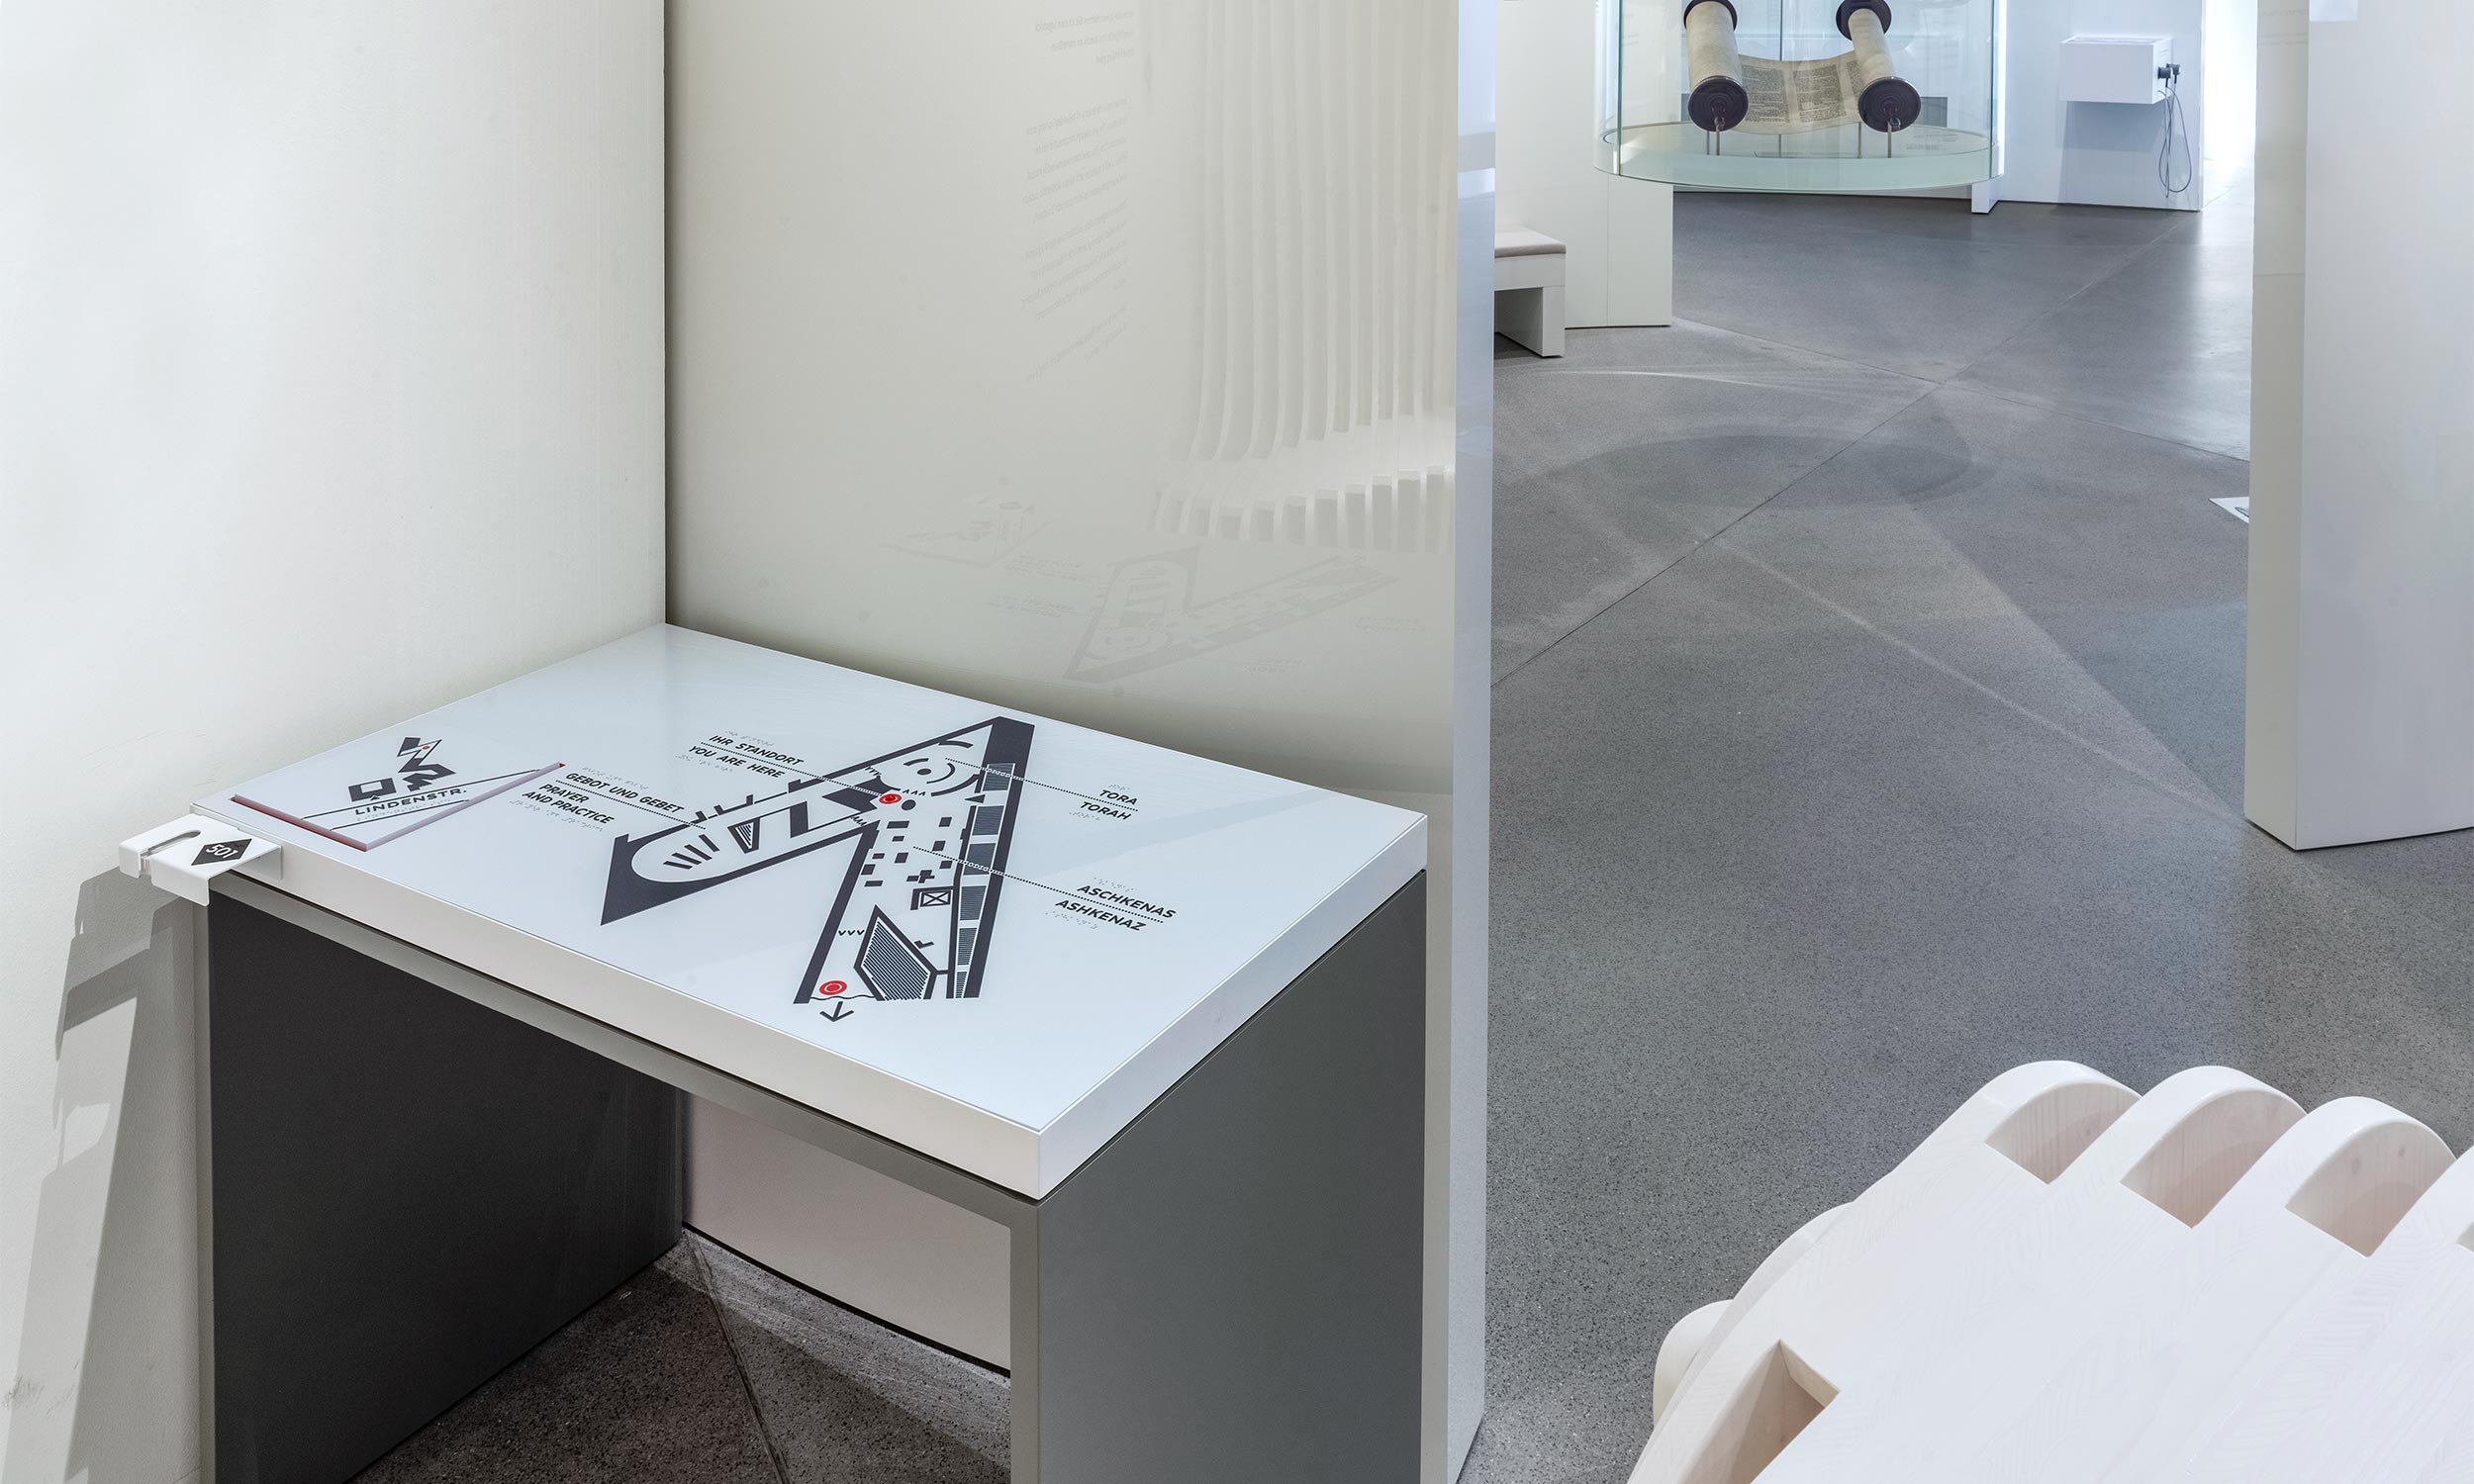 Photo of the tactile map in the Jewish Museum in Berlin fixed on a table. The table stands on the left in a corner which it fills completely. To the right of it, the wall ends and gives a view of the exhibition space with exhibits behind it.